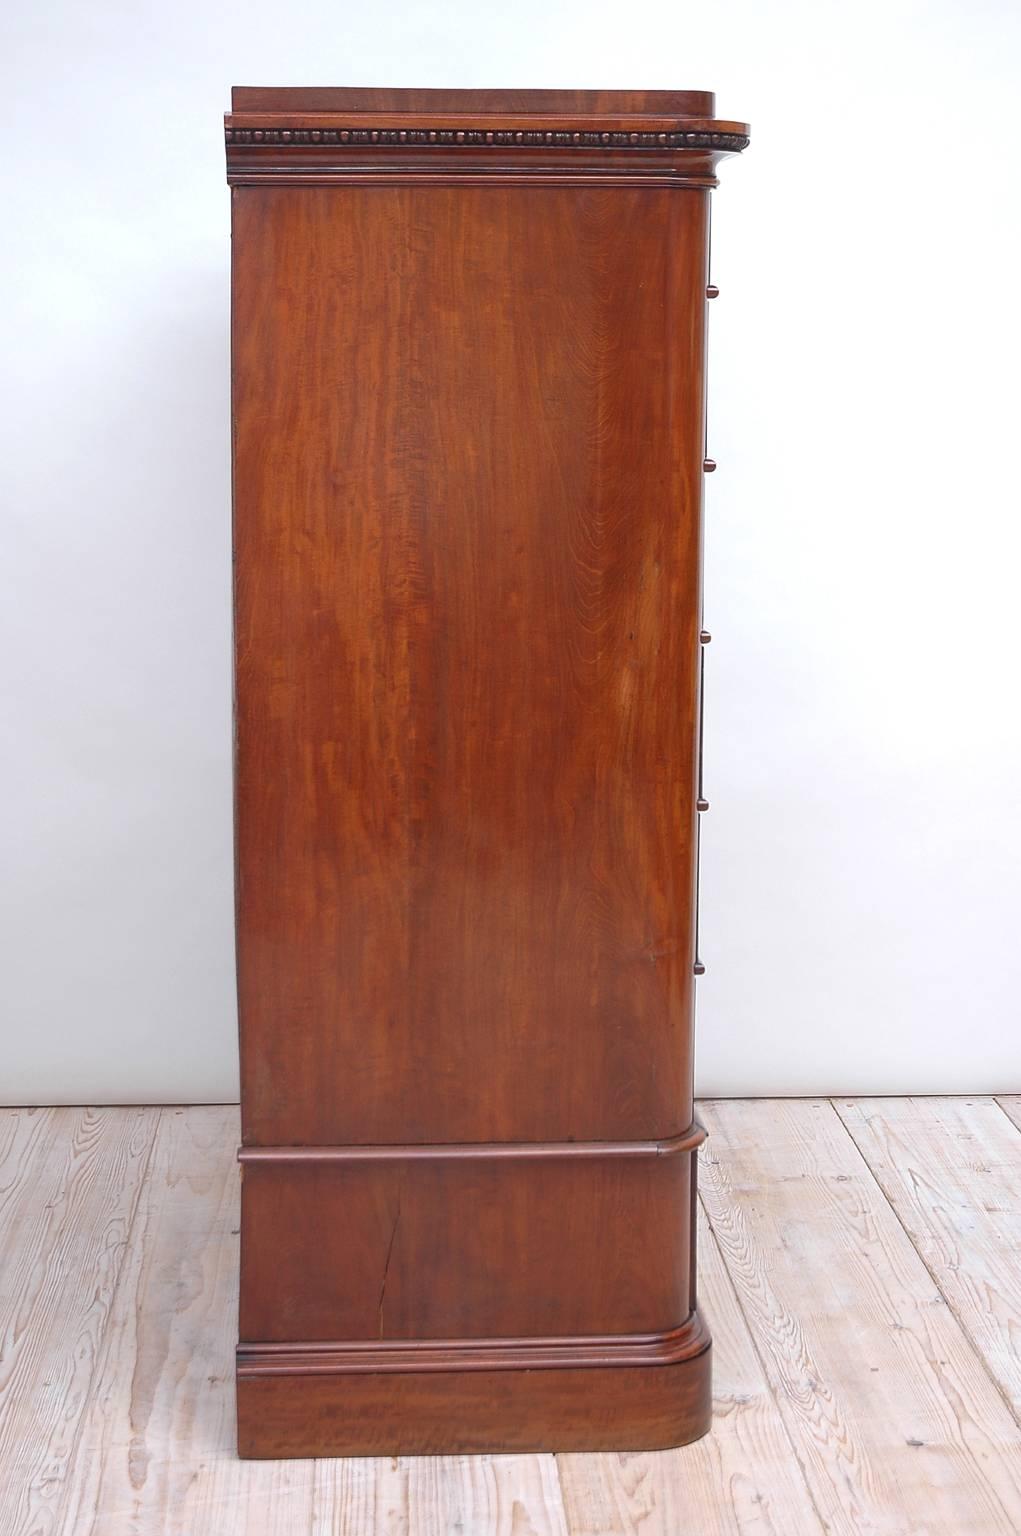 Danish Antique Biedermeier Tall Chest of Drawers in Bookmatched Mahogany, Denmark, 1840